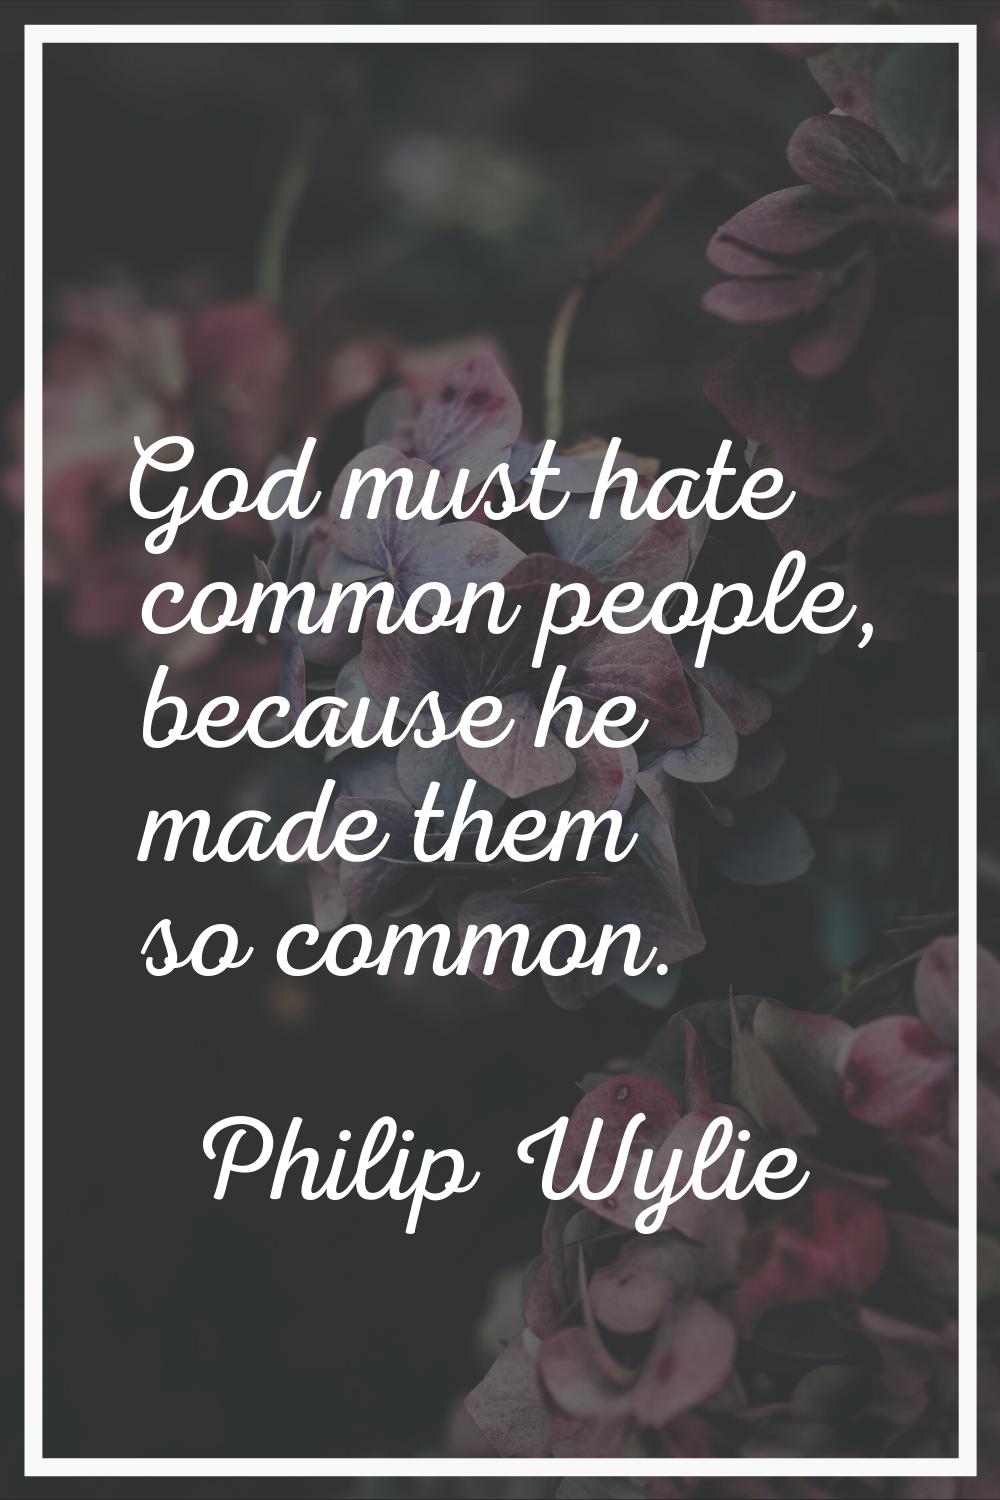 God must hate common people, because he made them so common.